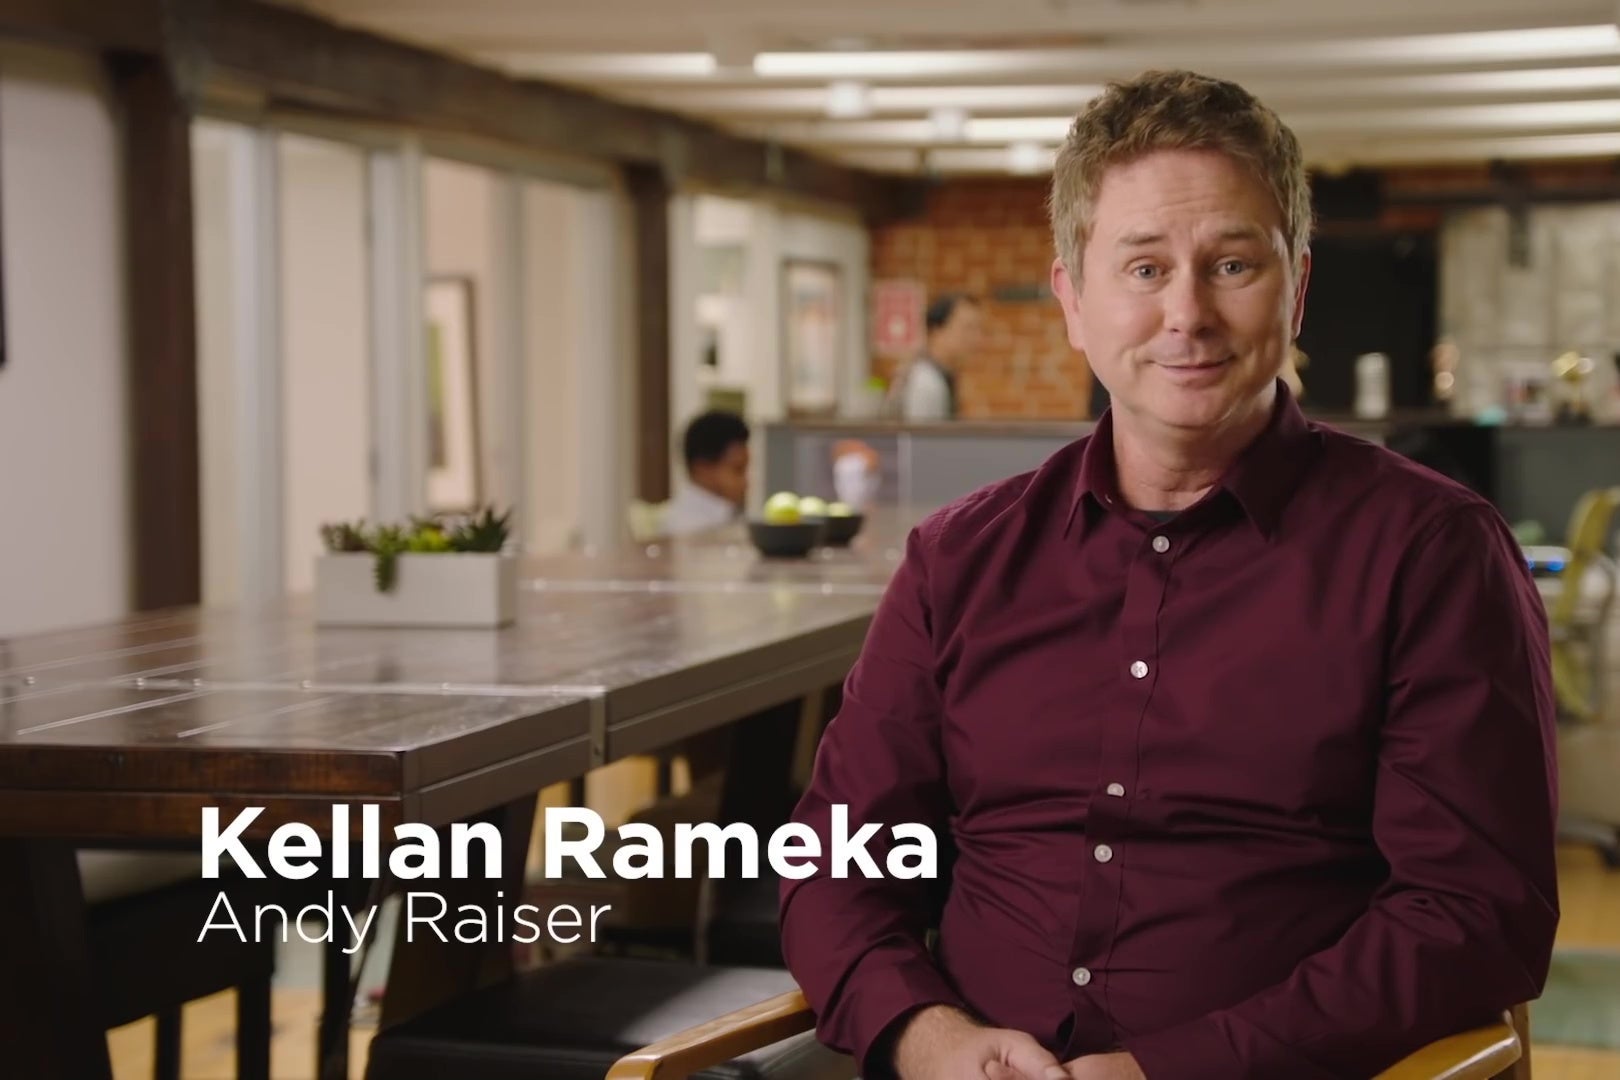 A man in a dark red shirt sits in an industrial office space, looking politely at the camera. Text identifies him as "Kellan Rameka: Andy Raiser."